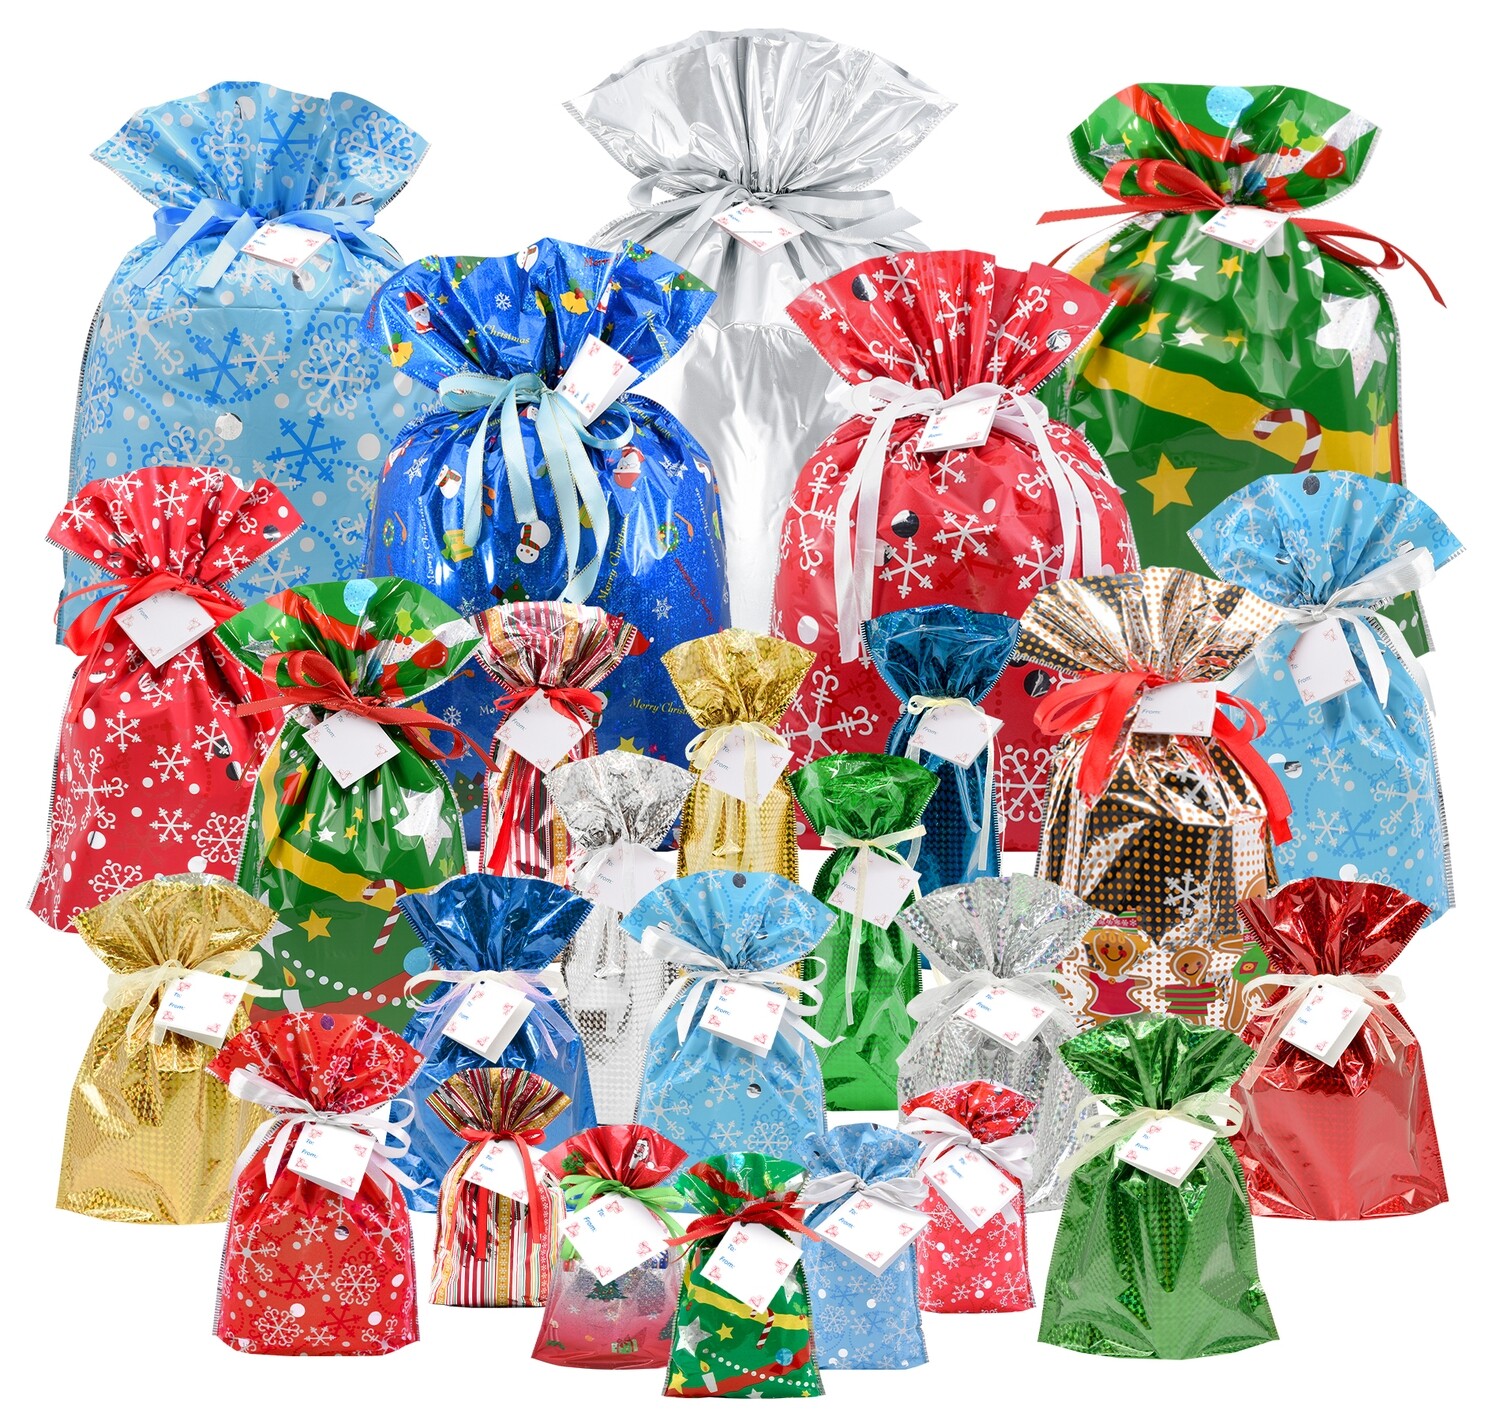 52-Piece Gift Bag Set (26 Gift Bags and 26 Gift Tags)